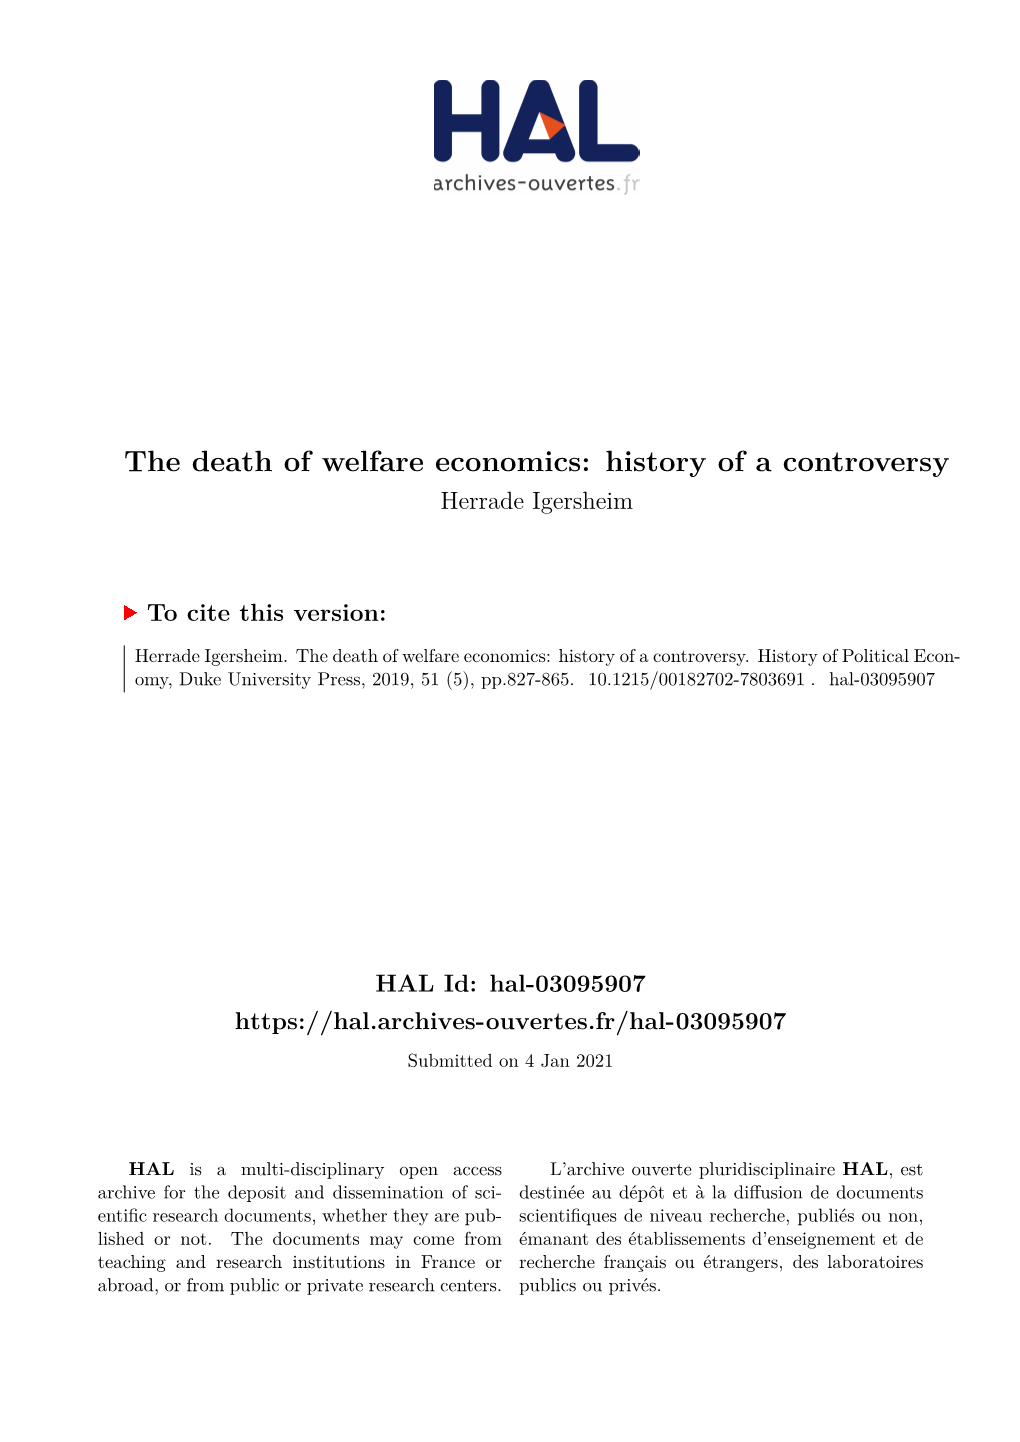 The Death of Welfare Economics: History of a Controversy Herrade Igersheim